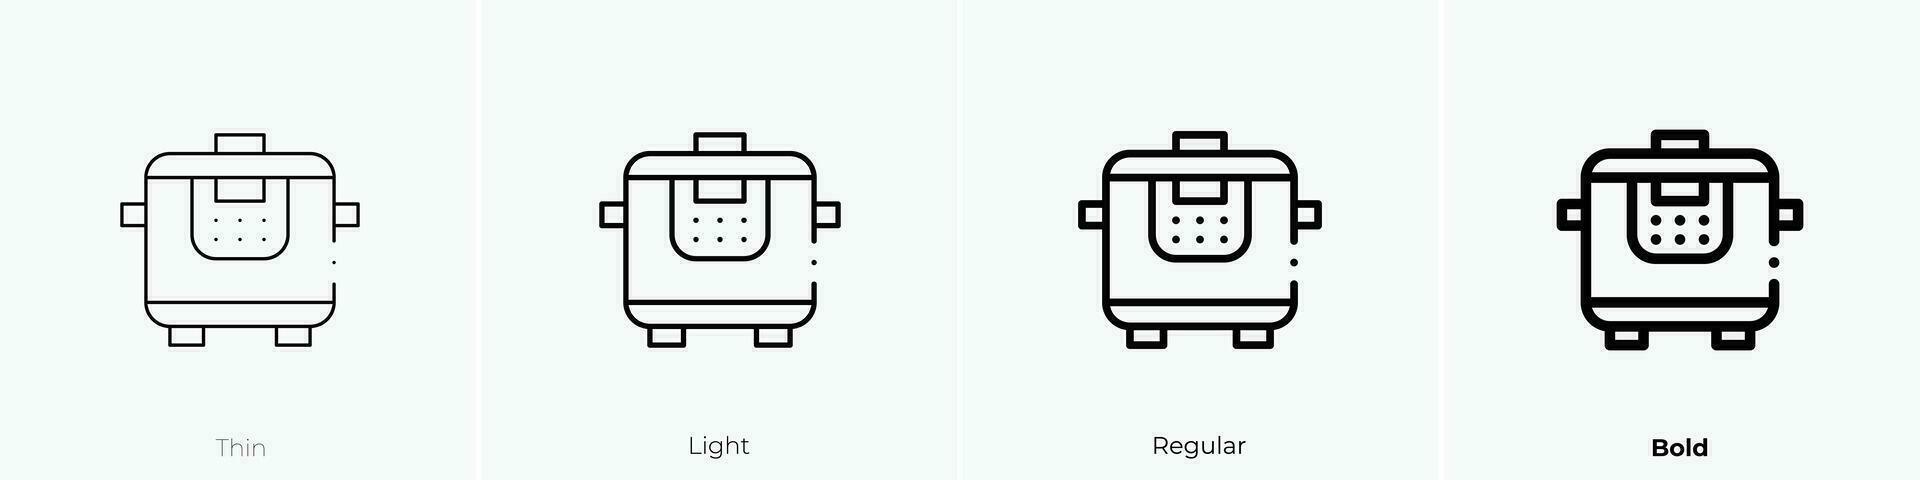 slow cooker icon. Thin, Light, Regular And Bold style design isolated on white background vector